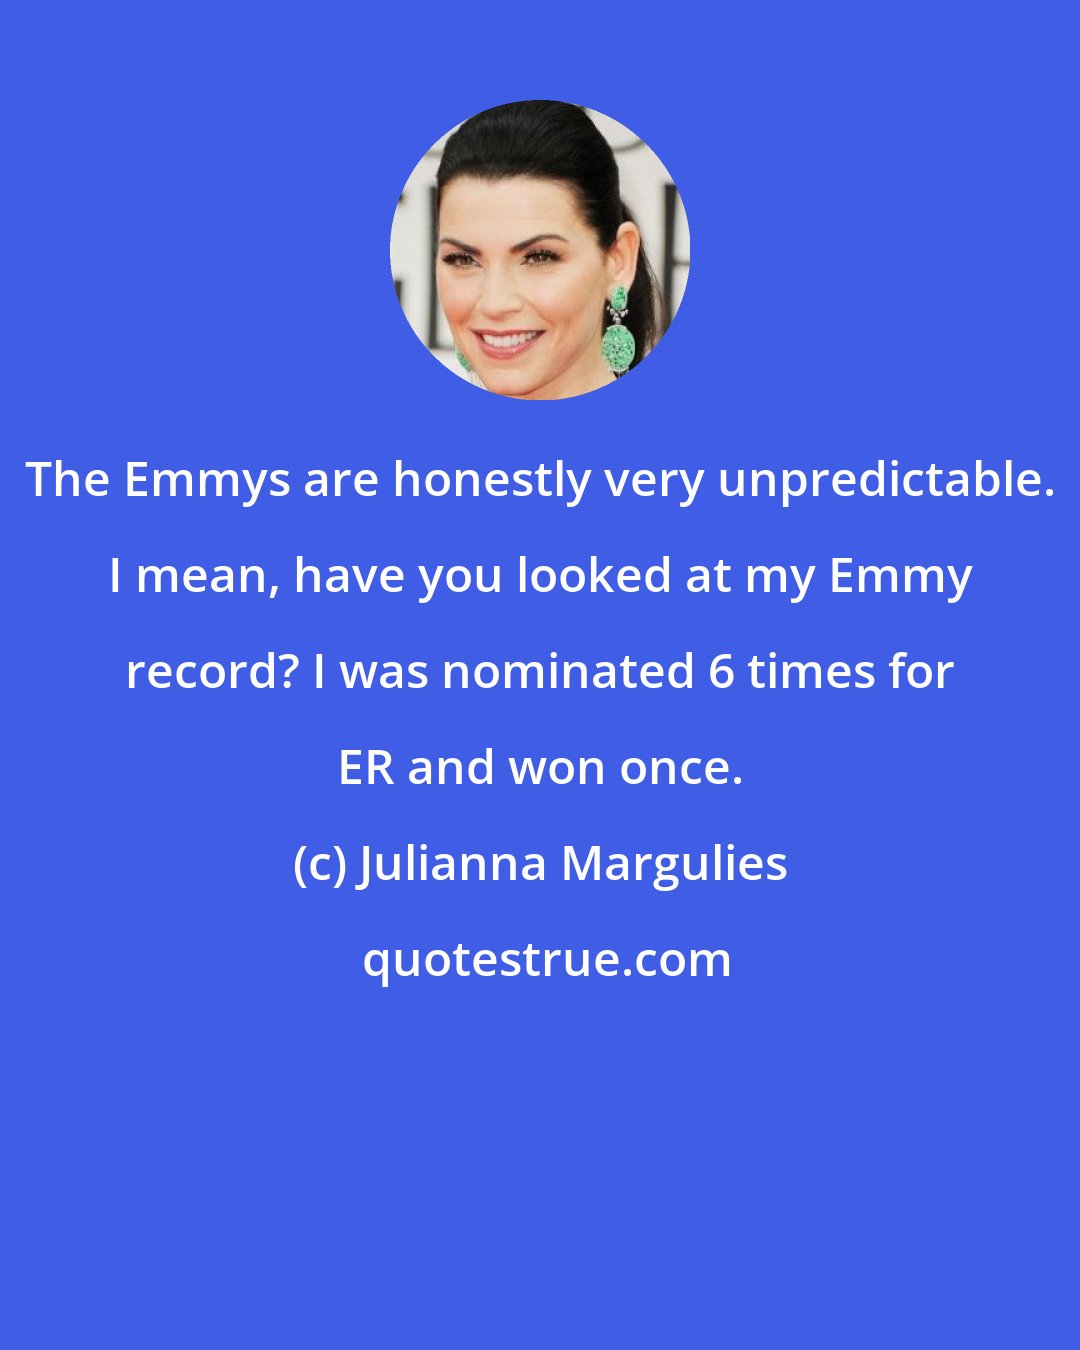 Julianna Margulies: The Emmys are honestly very unpredictable. I mean, have you looked at my Emmy record? I was nominated 6 times for ER and won once.